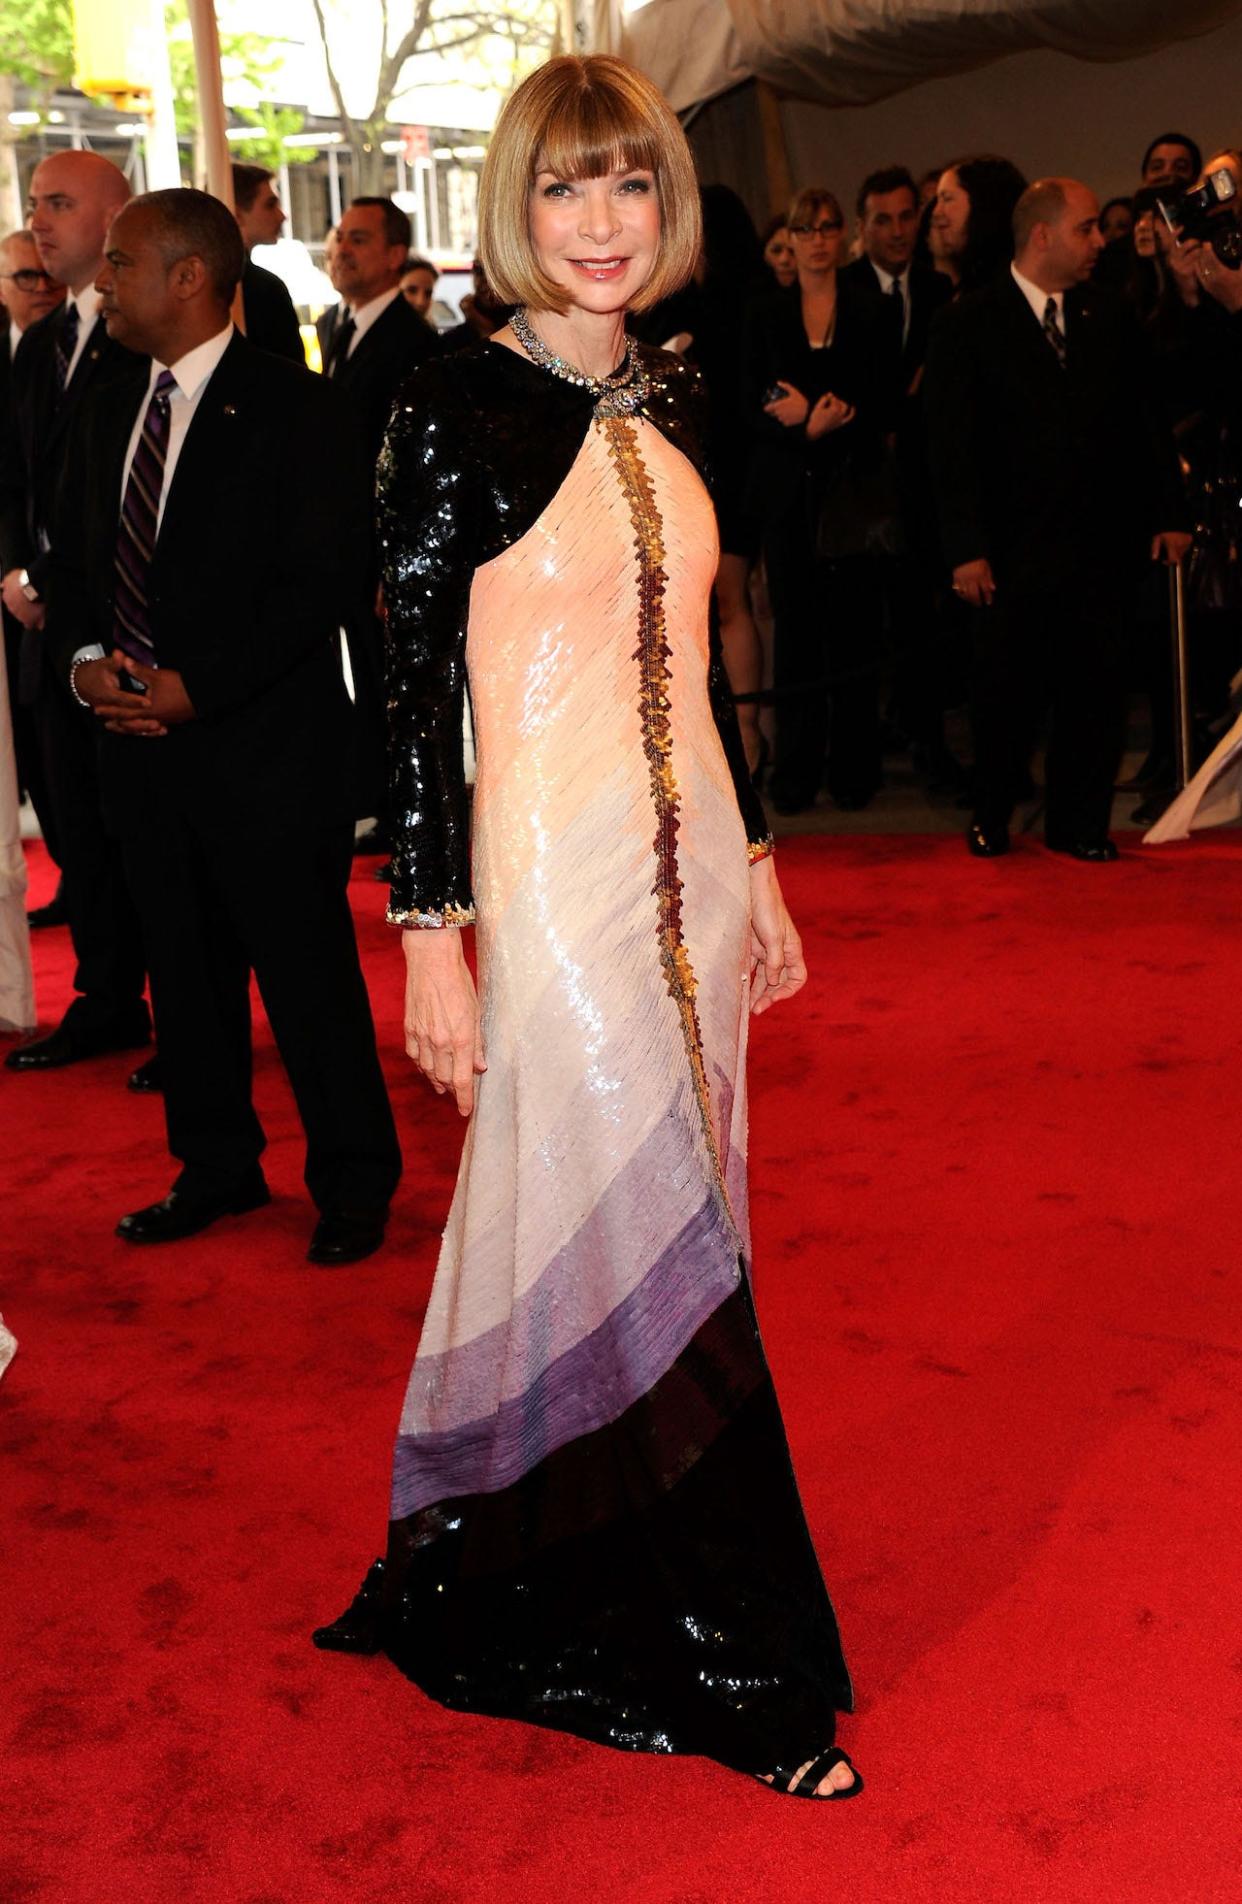 Anna Wintour at the 2011 Met Gala.